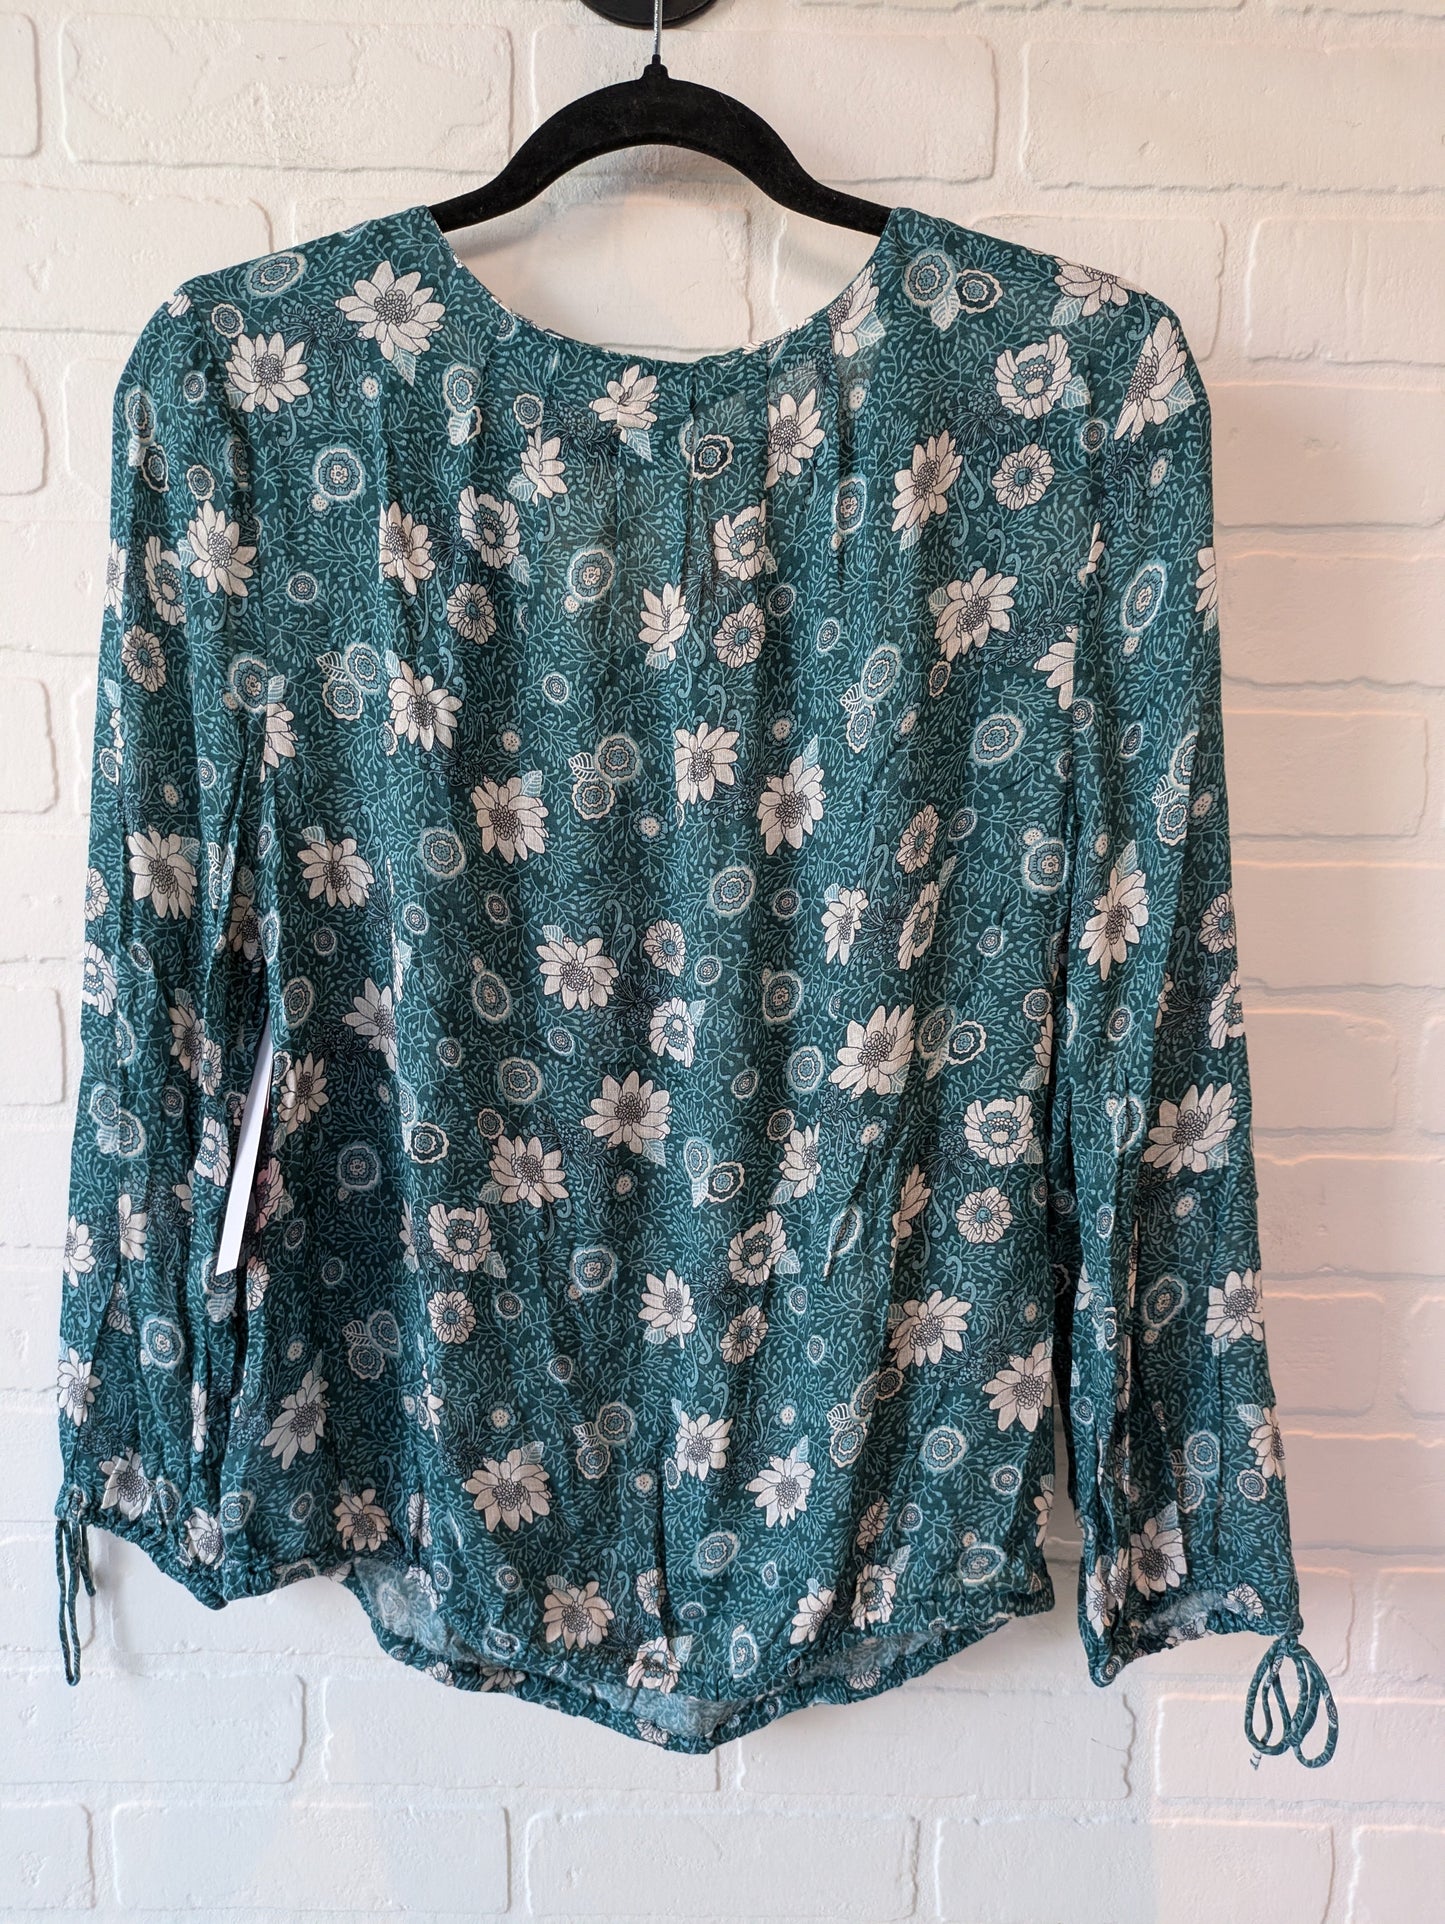 Green Top Long Sleeve Lucky Brand, Size M